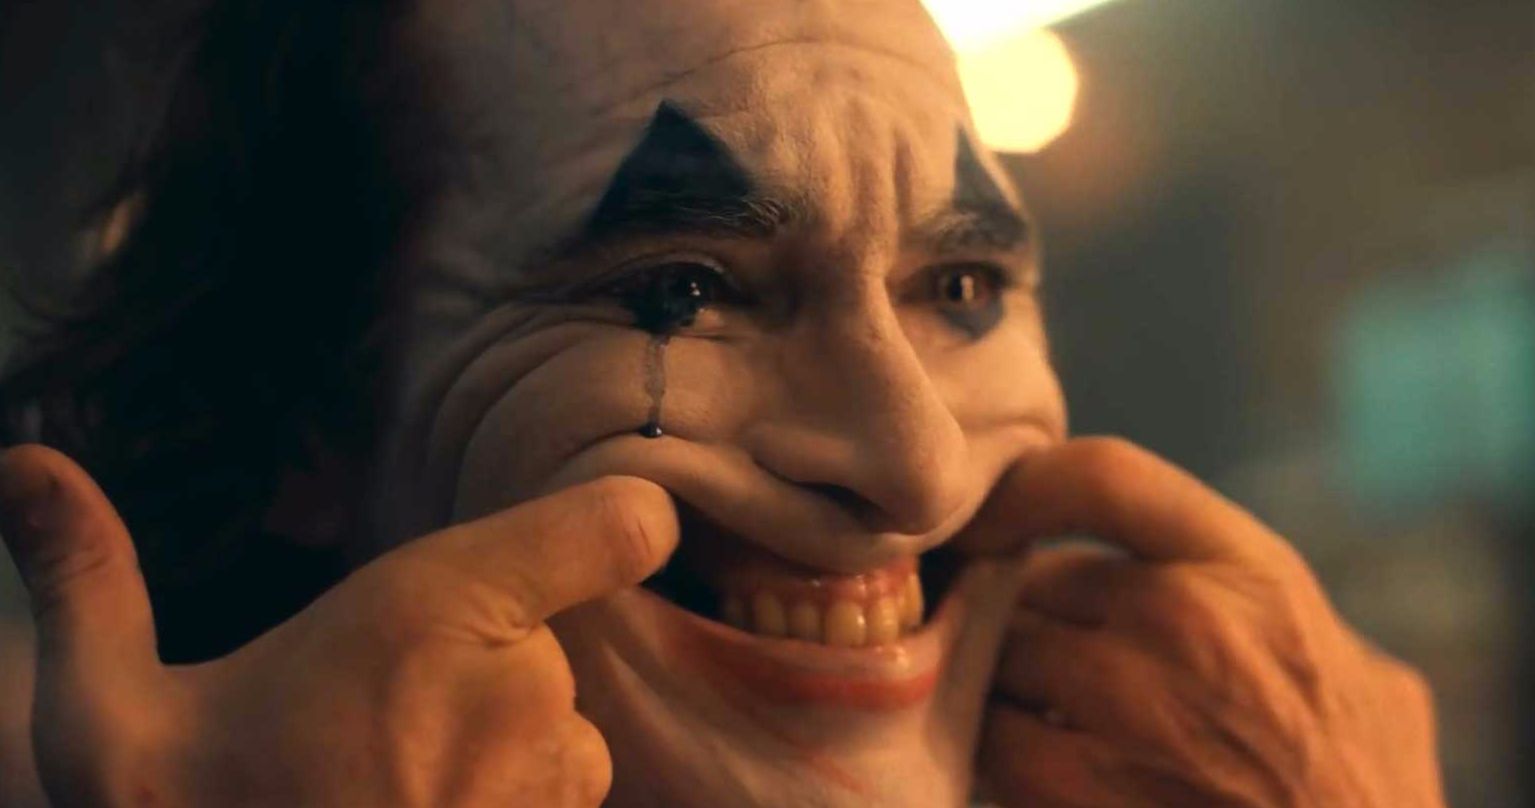 Joker Director Responds to Disgruntled Fan: You May Want to Skip This One